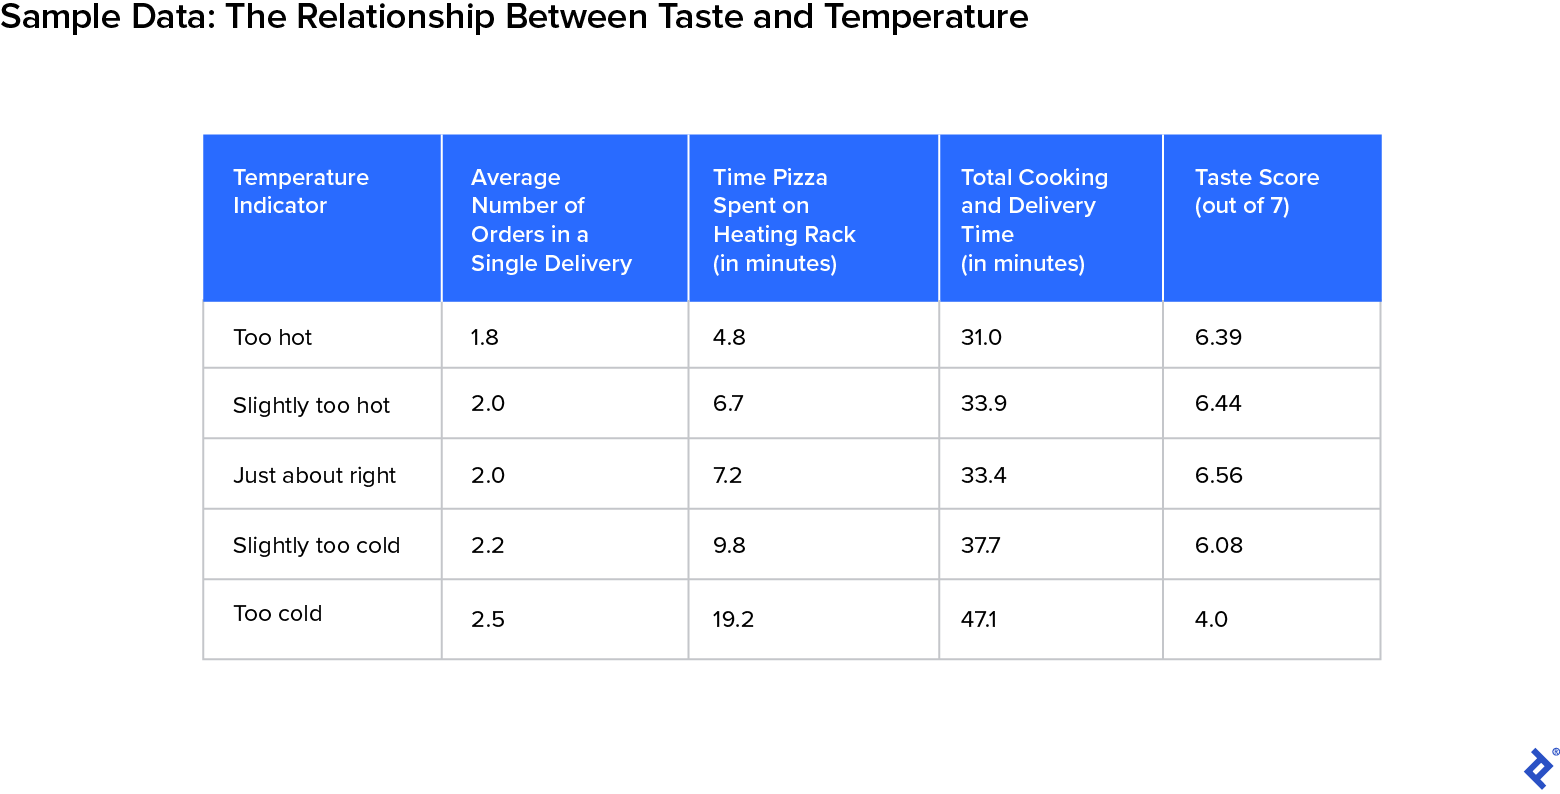 A table entitled Sample Data: The Relationship Between Taste and Temperature shows the relationship between taste and temperature. The first column lists five temperature ratings: too hot, slightly too hot, just about right, slightly too cold, and too cold. The second column shows the average number of orders in a single delivery. The third column shows the time the pizza spent on the heating rack in minutes. The fourth column shows the total cooking and delivery time in minutes. The fifth column shows the overall taste score out of 7. The data points in the table indicate that when a customer’s pizza was rated too hot, there were fewer orders in the delivery, it spent less time on the rack, the total cooking and delivery time was less, and the taste score was higher. Conversely, when the pizza was rated too cold, there were more orders in the delivery, it spent more time on the rack, the total cooking and delivery times were more, and the overall taste score was much lower.